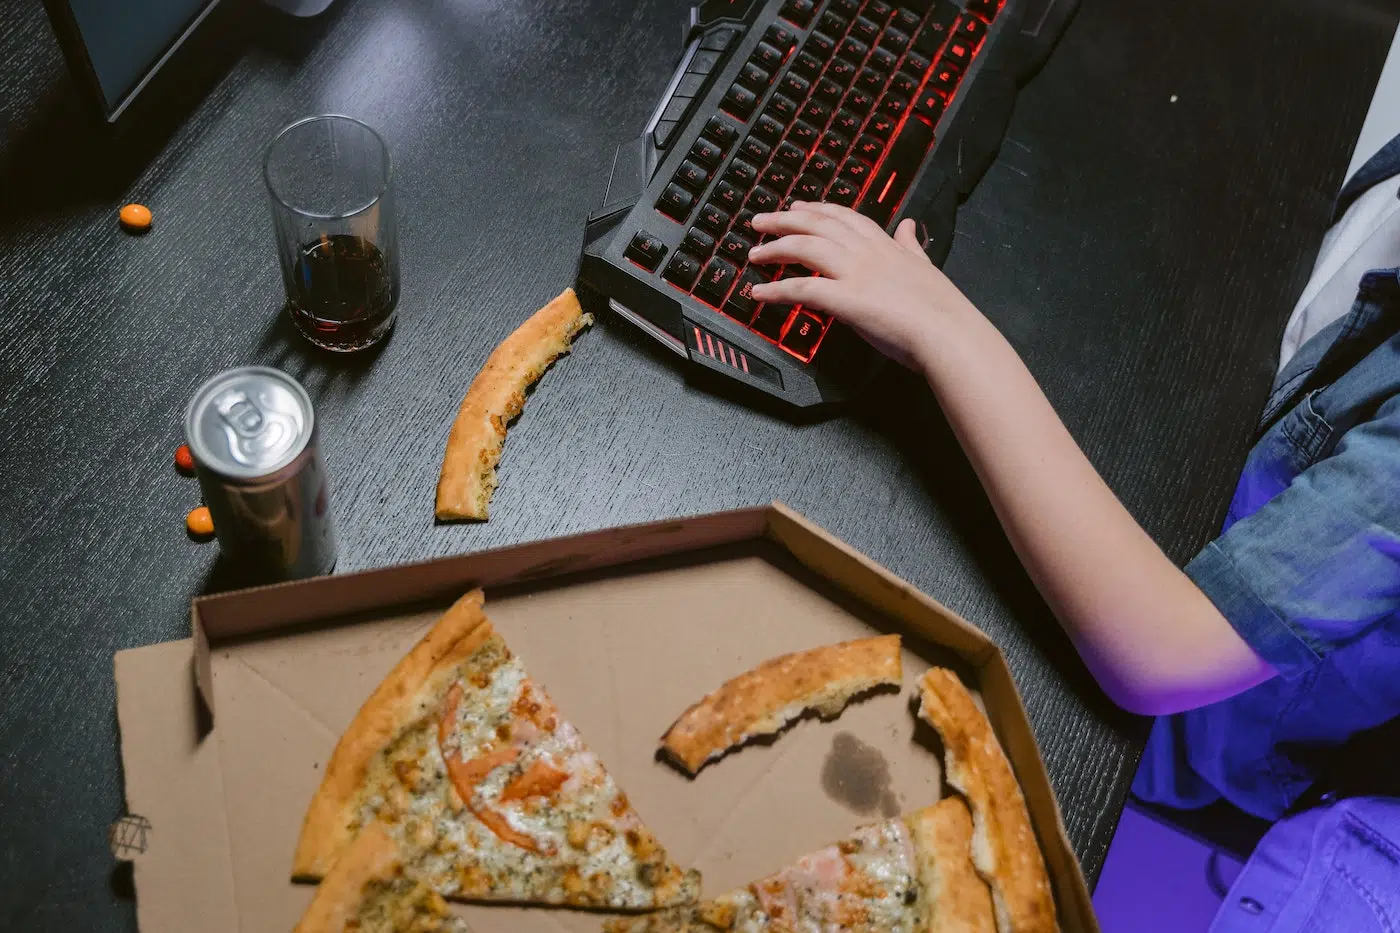 Gamer with pizza on desk